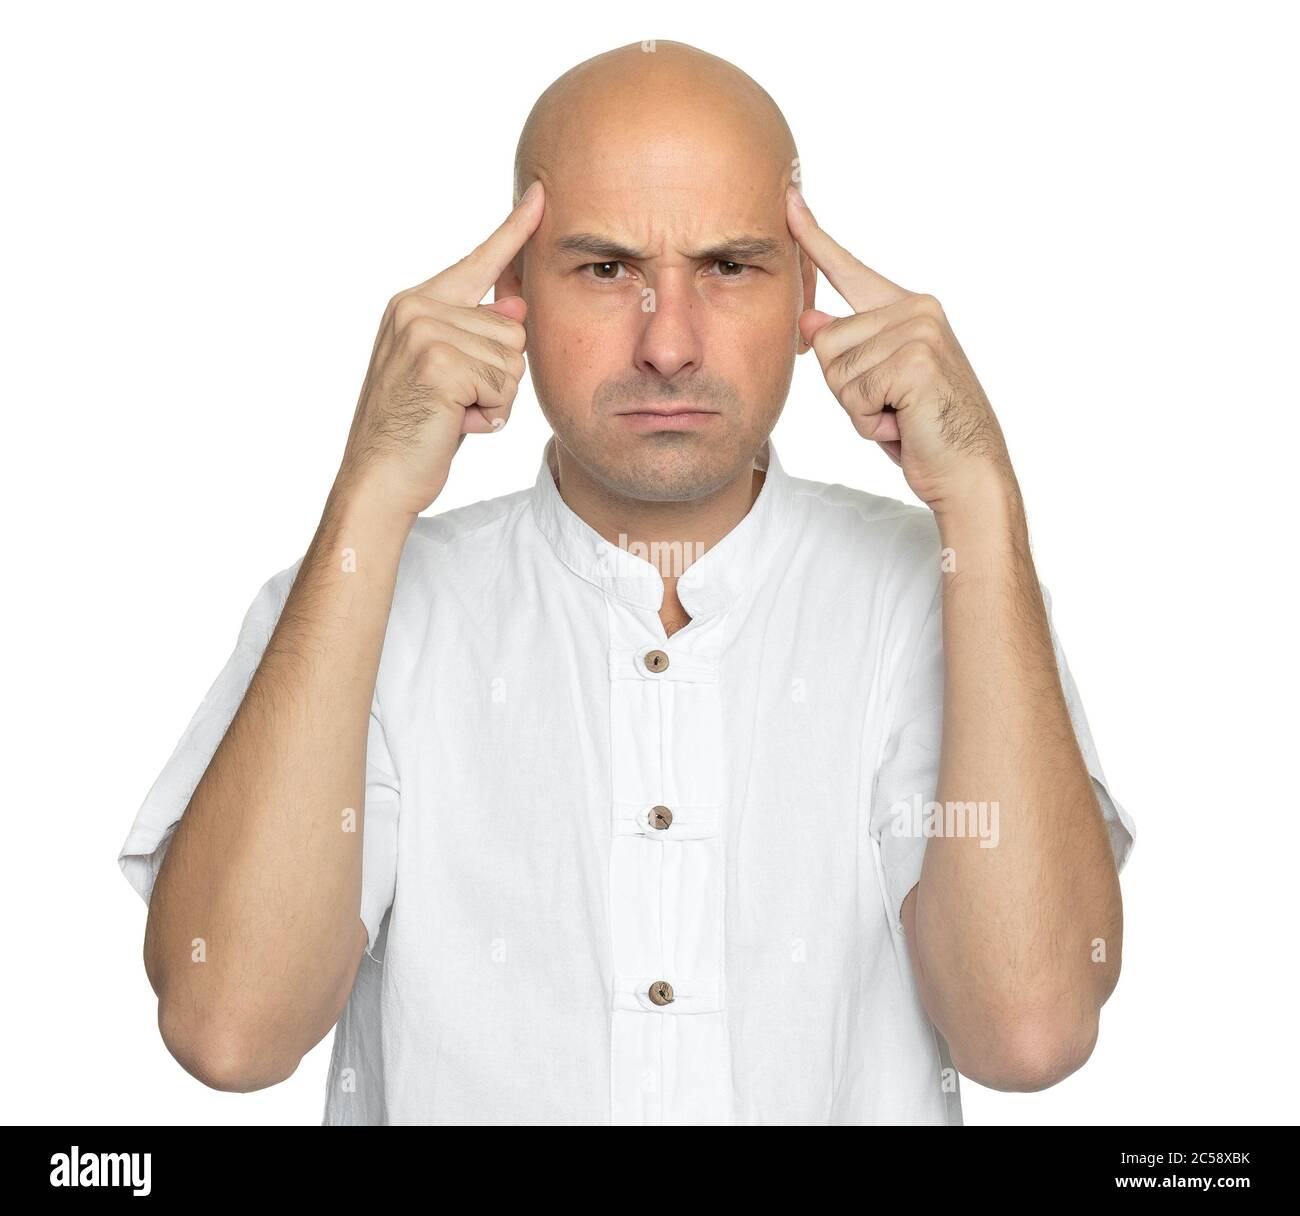 Angry bald man in casual white shirt is thinking. Isolated Stock Photo